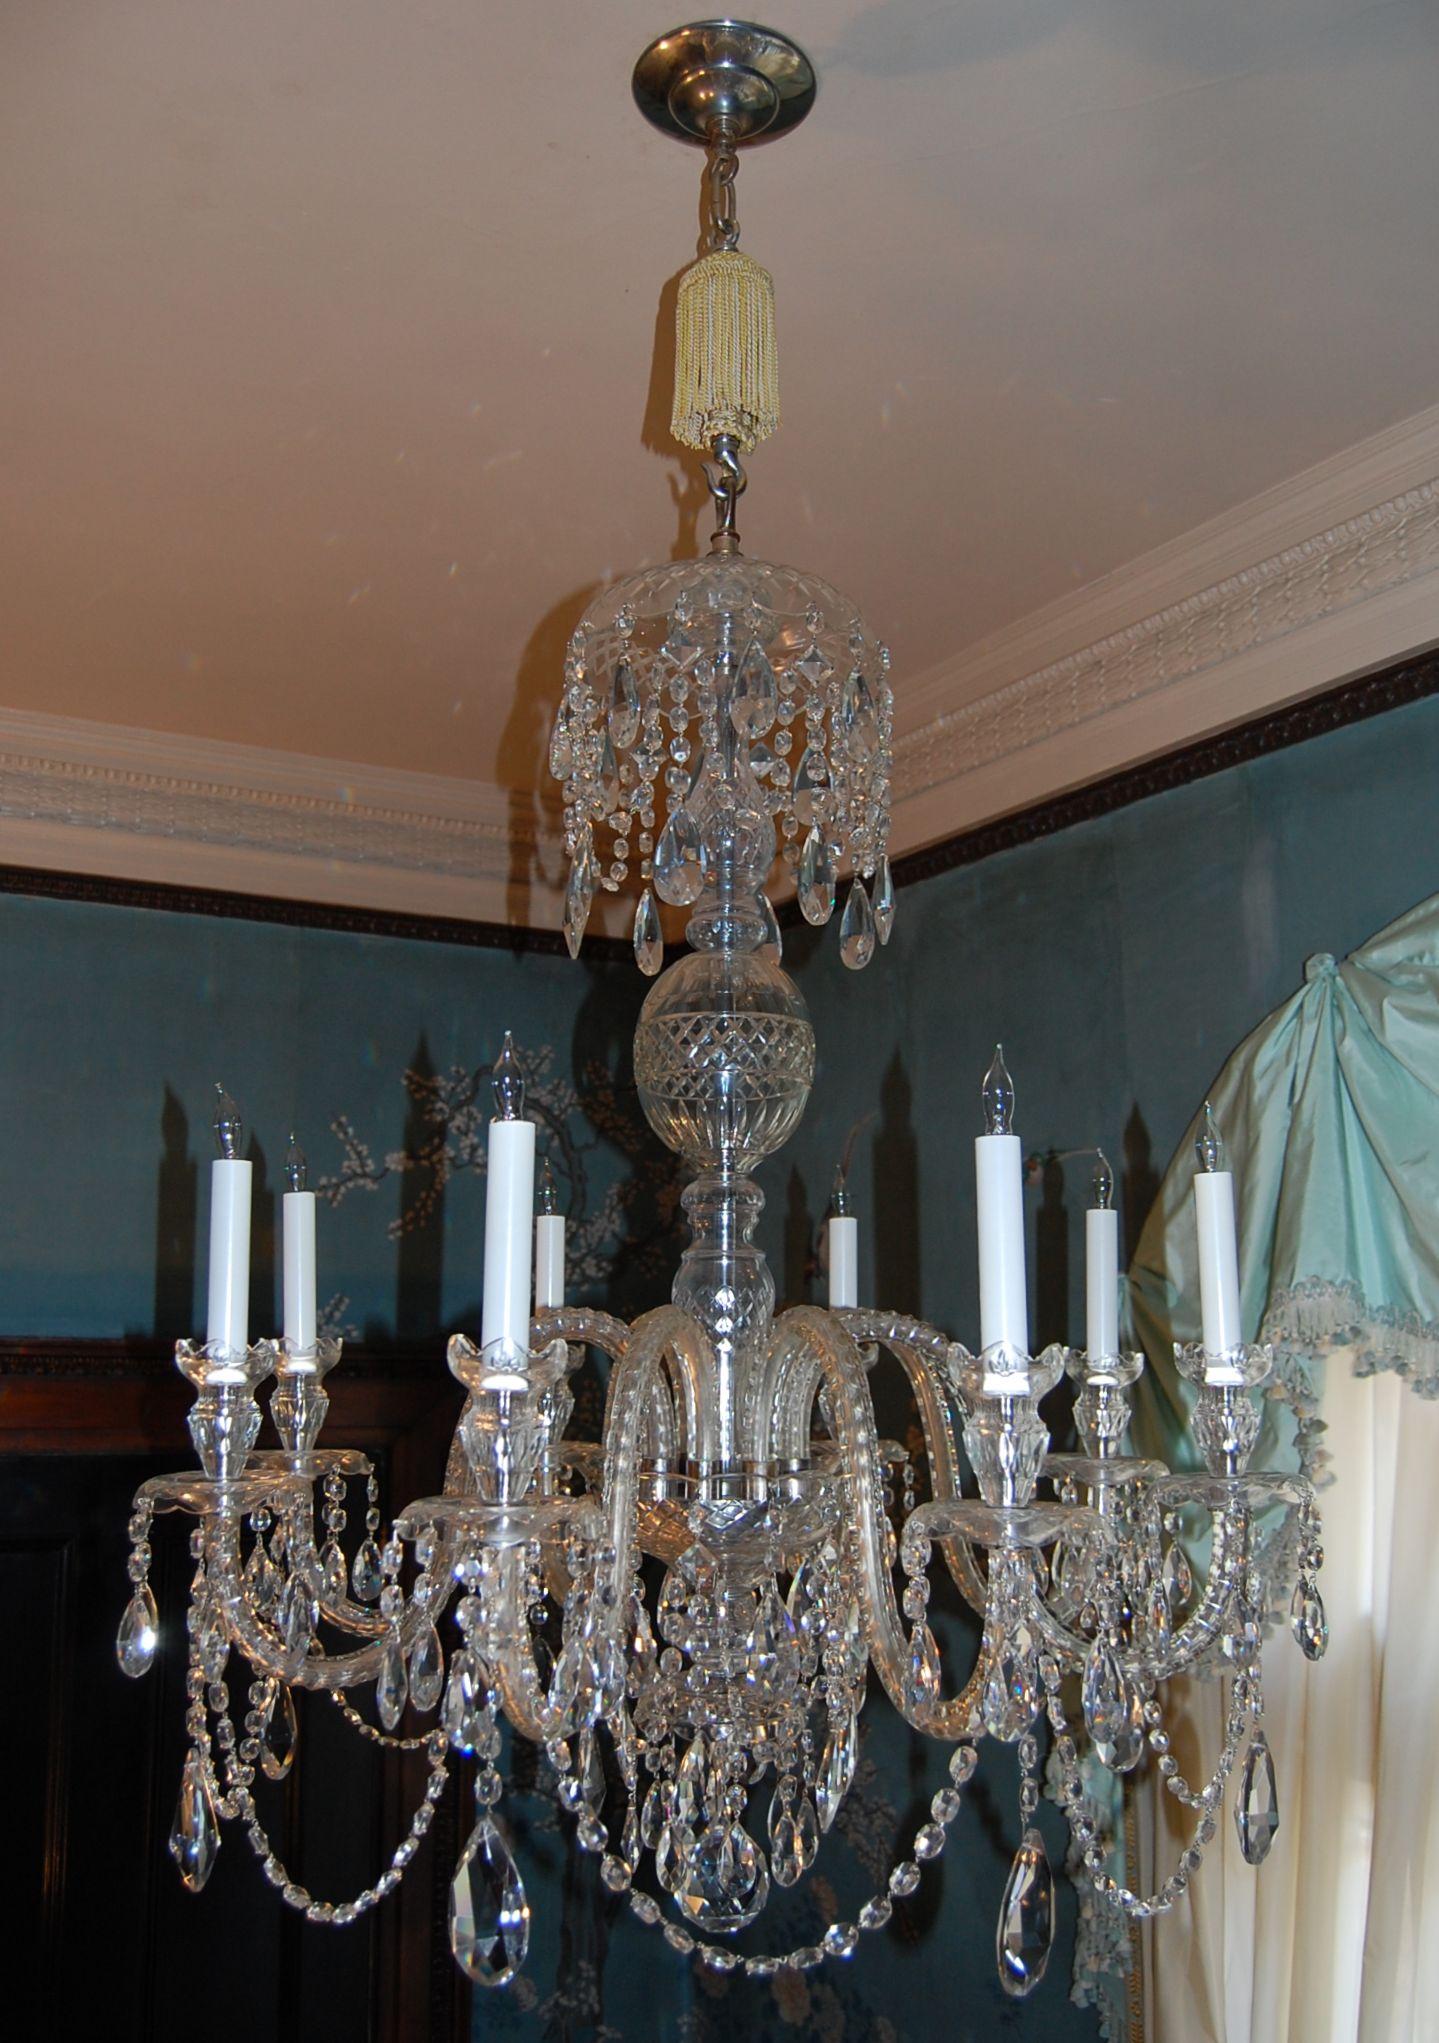 Waterford style eight-light chandelier, recently cleaned and rewired with custom silk tassel, hook and canopy. Originally purchased from Nesle Lighting in New York for a Pittsburgh client. The fixture without the tassel measures 42